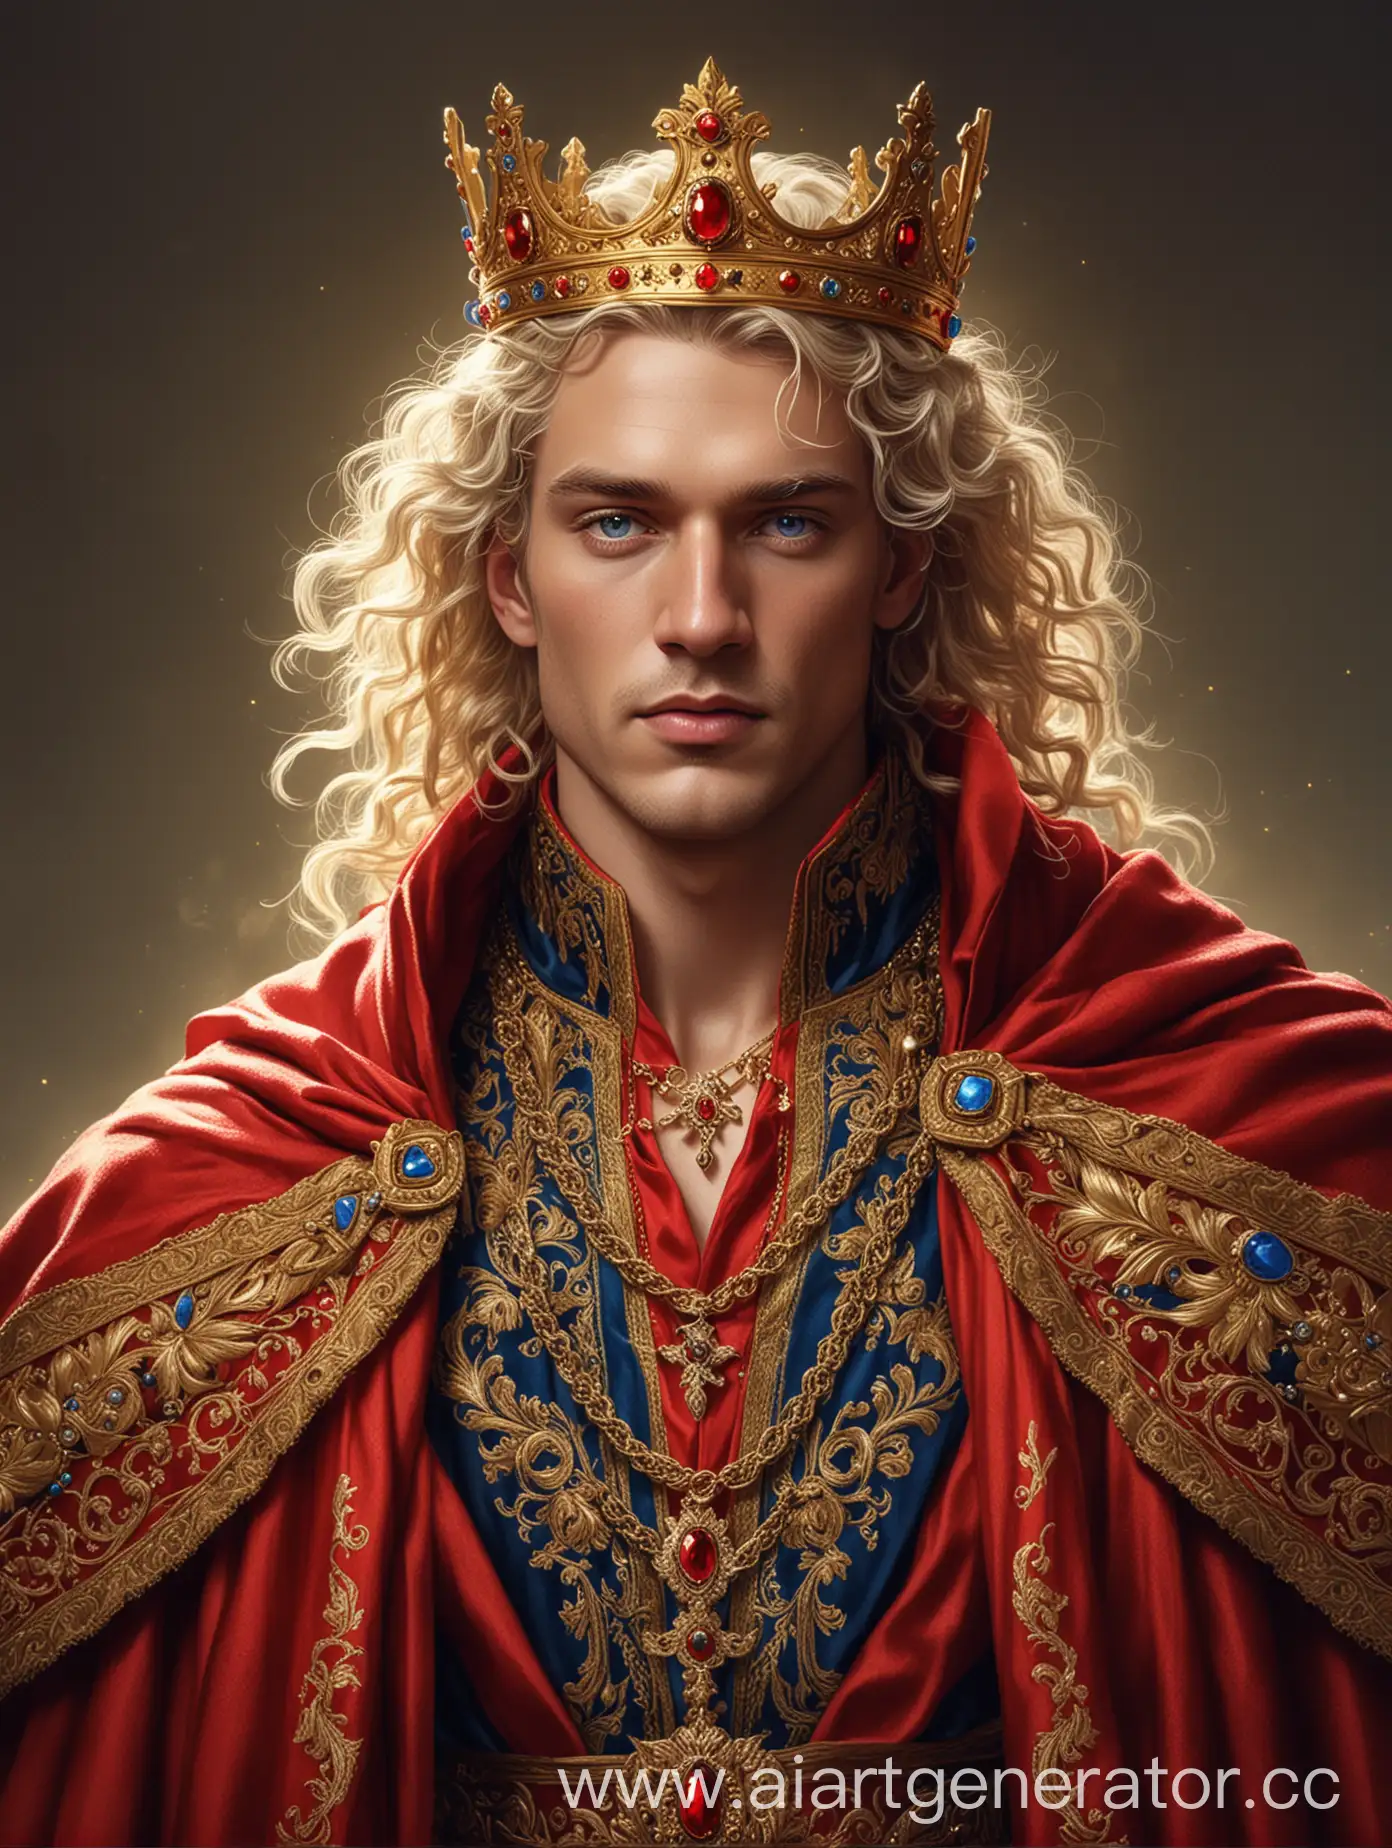 Majestic-King-in-Luxurious-Red-Cloak-with-Gold-Jewelry-and-Crown